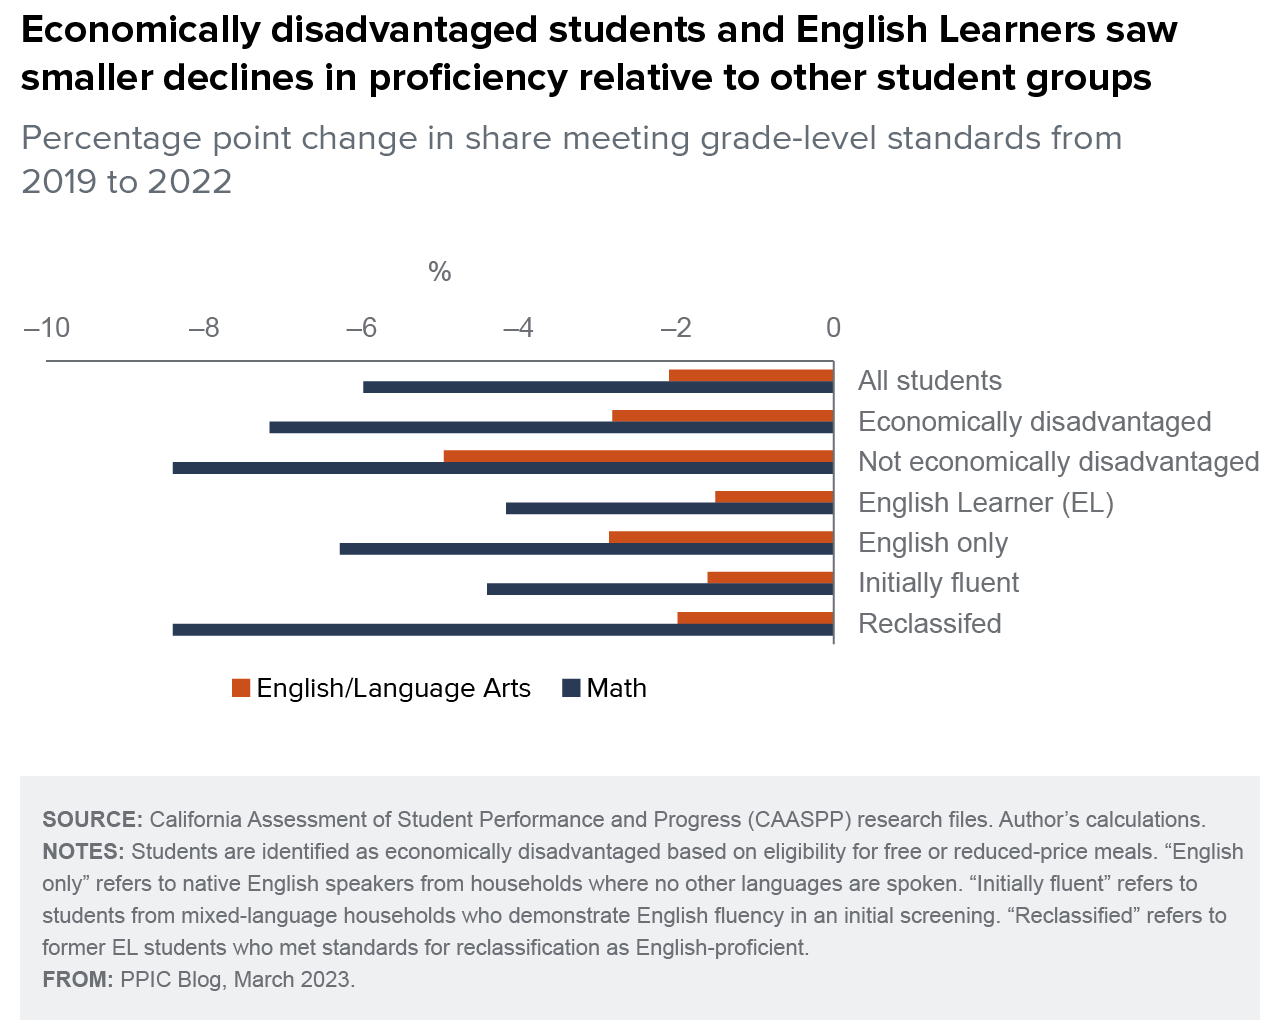 figure - Economically disadvantaged students and English Learners saw smaller declines in proficiency relative to other student groups